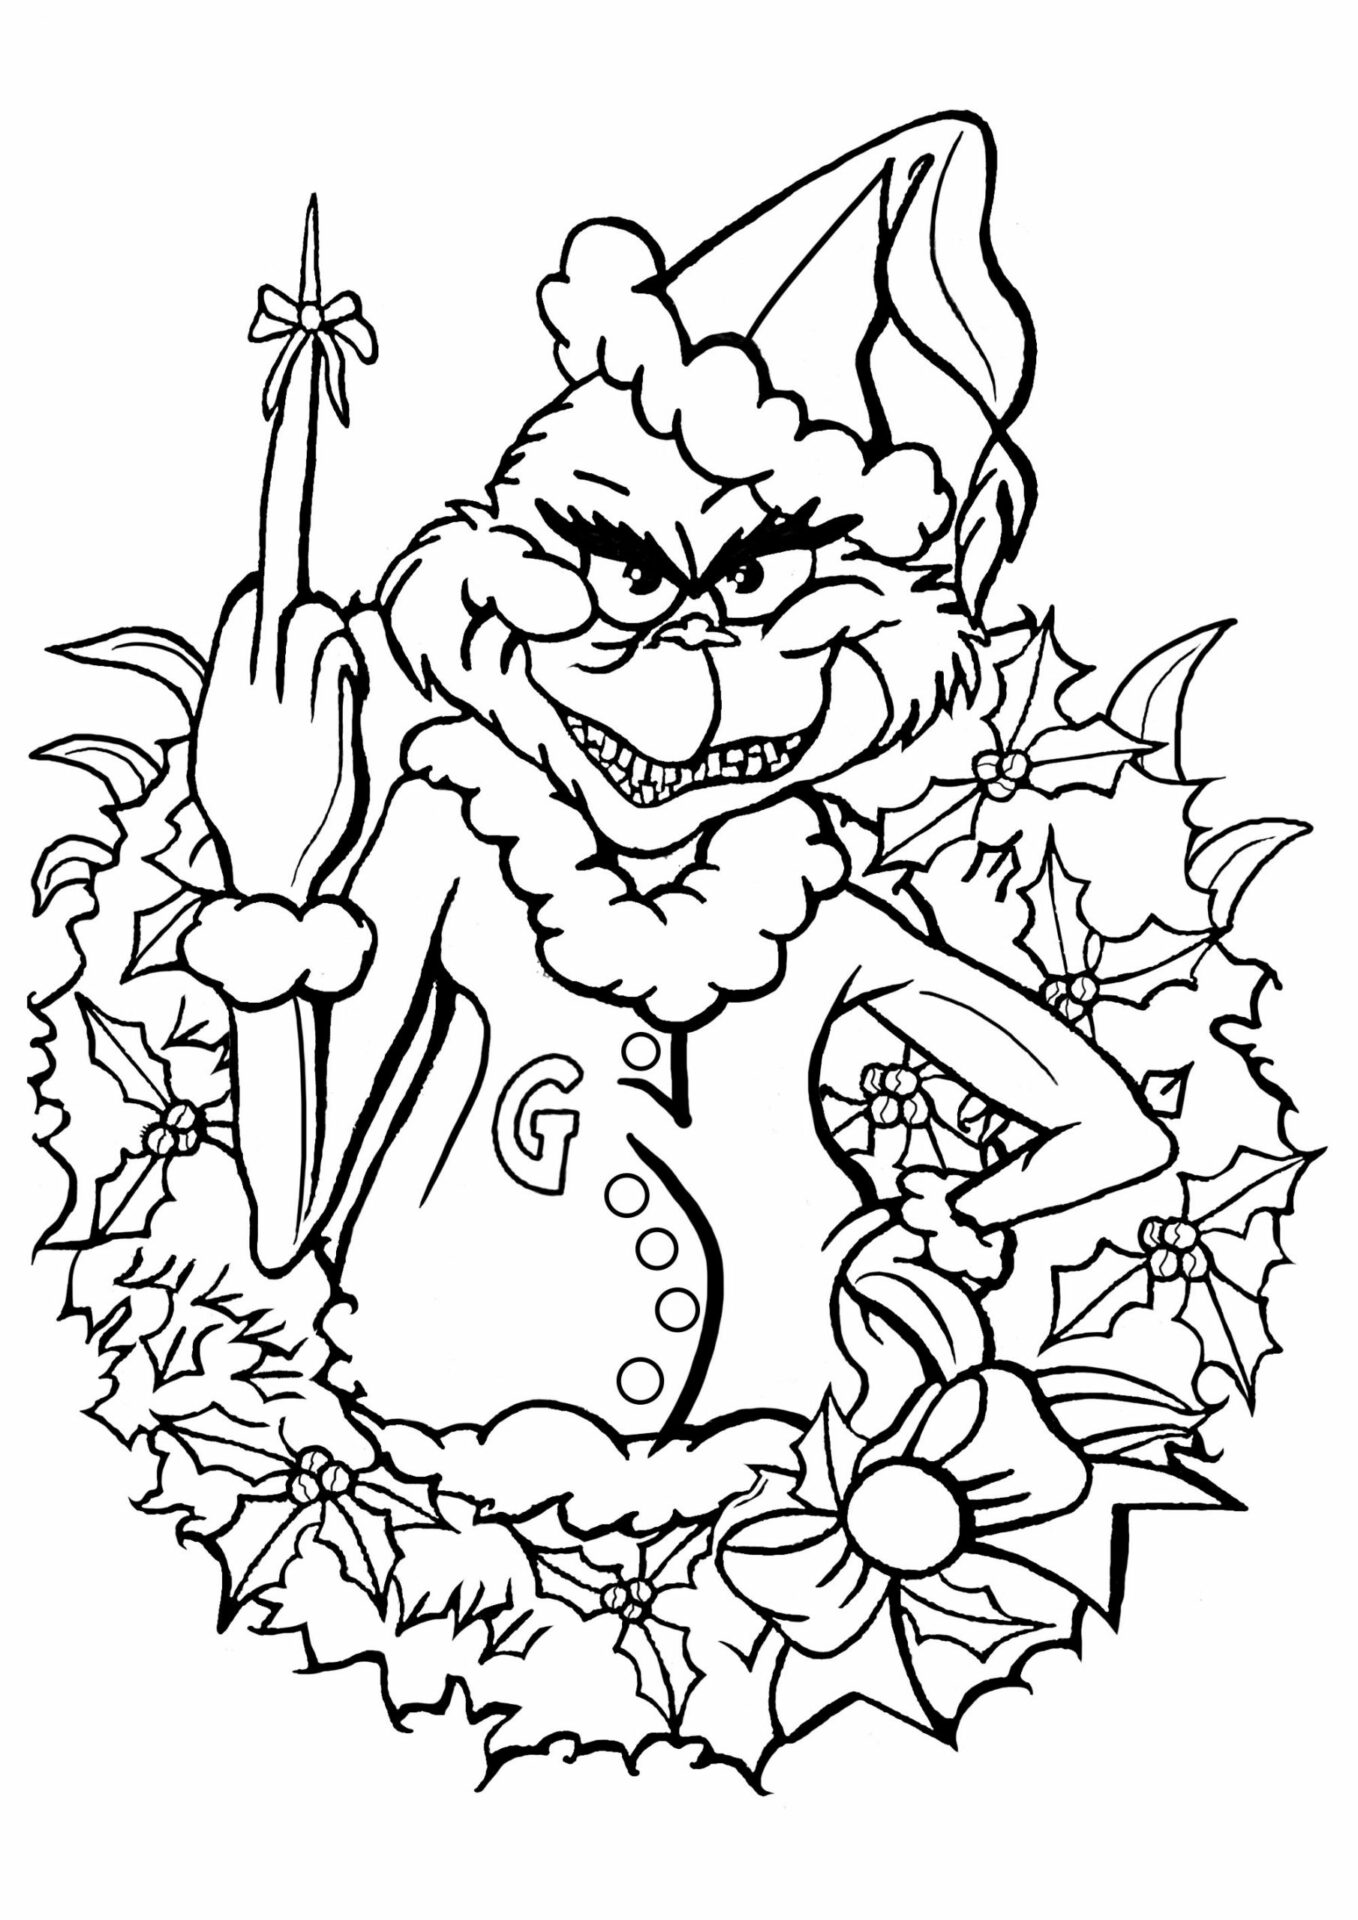 Grinch's Face Coloring Page - Free Printable Coloring Pages for Kids